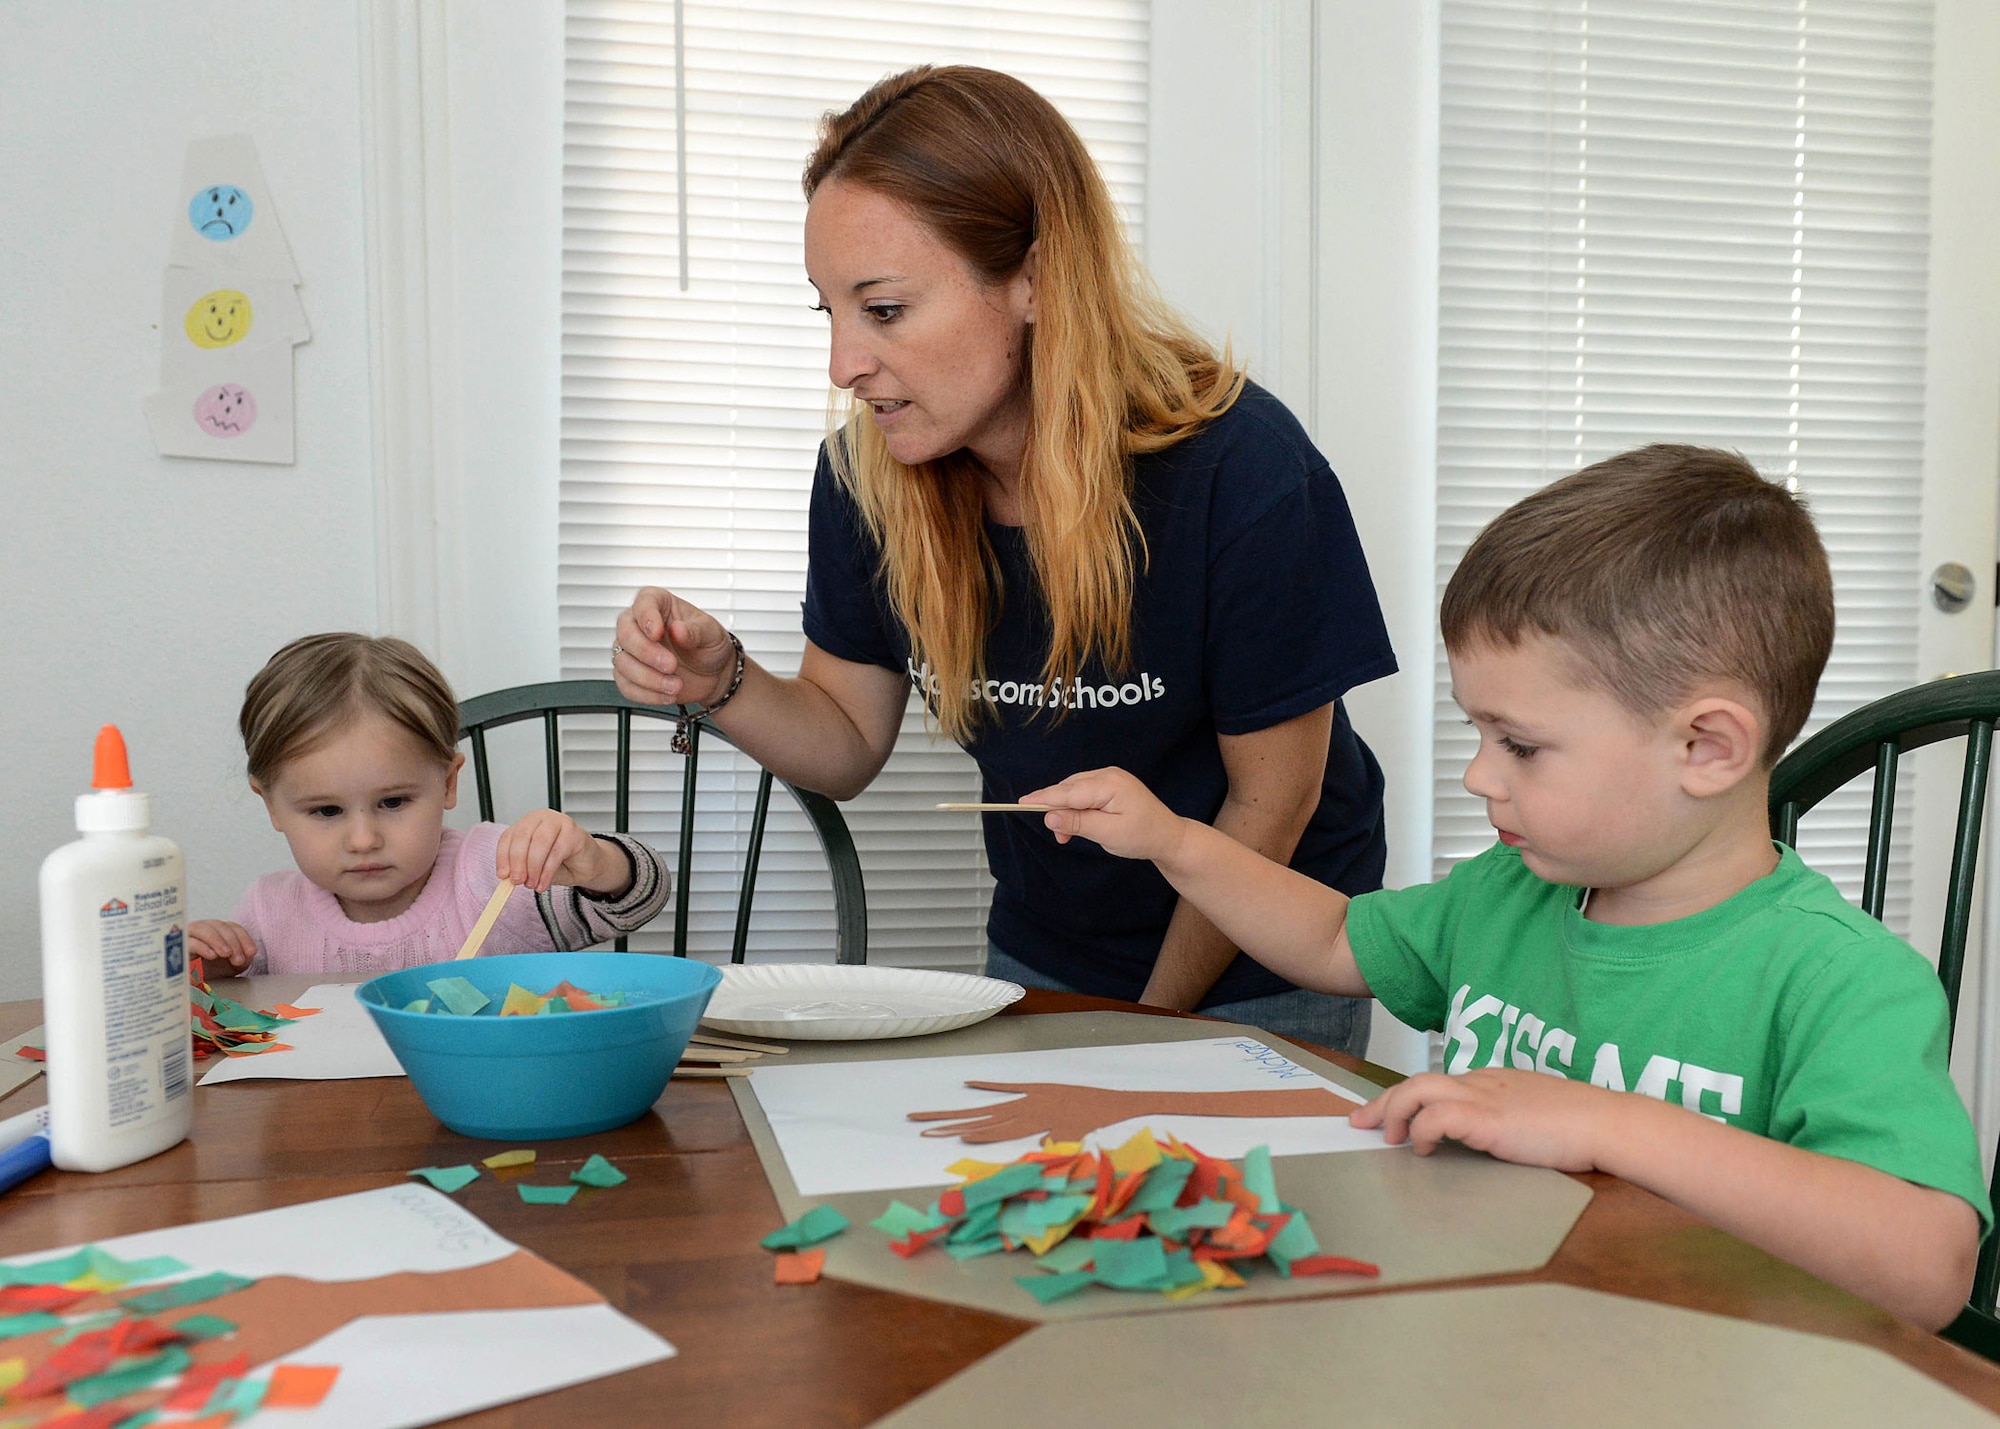 Amber Krofta, a Family Child Care provider, helps Anya Zamzow, right, and Michael Krohn, left, Sept. 21 during play time at her house where she cares for children. Family Child Care program is actively recruiting individuals in base housing who wish to become child care professionals. (U.S. Air Force photo by Jerry Saslav)
